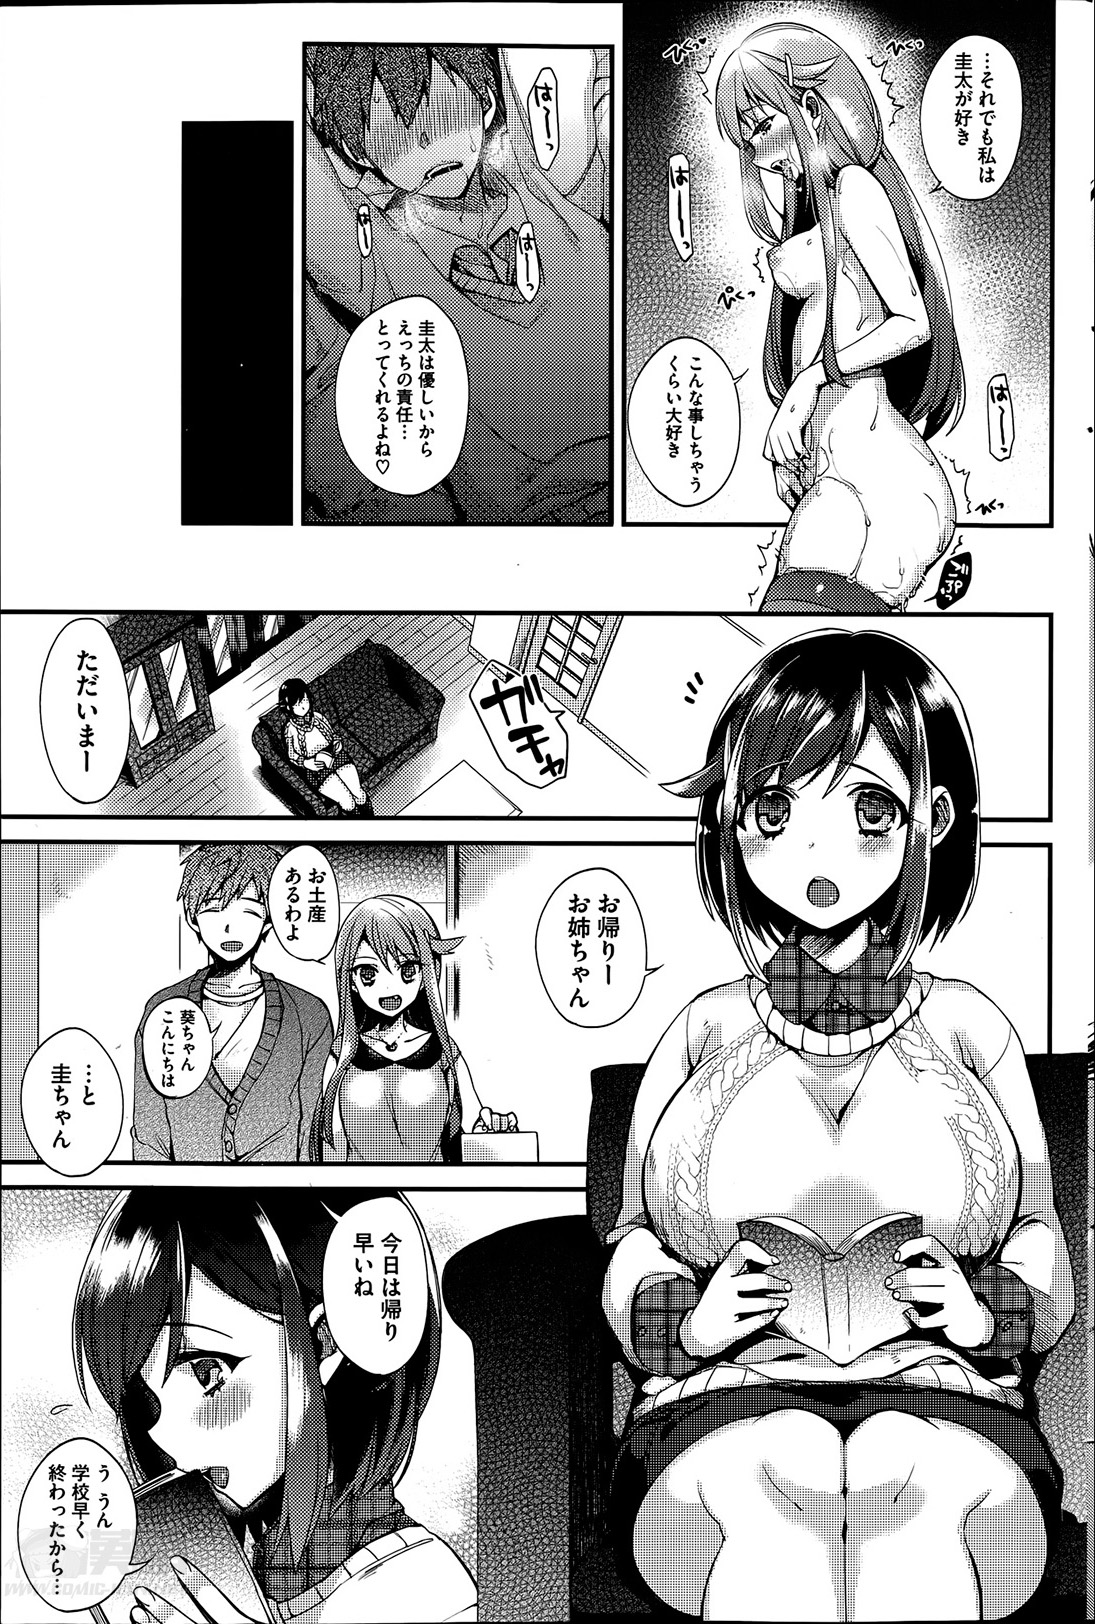 [Shindou] Sisters Conflict Ch.1-2 page 3 full